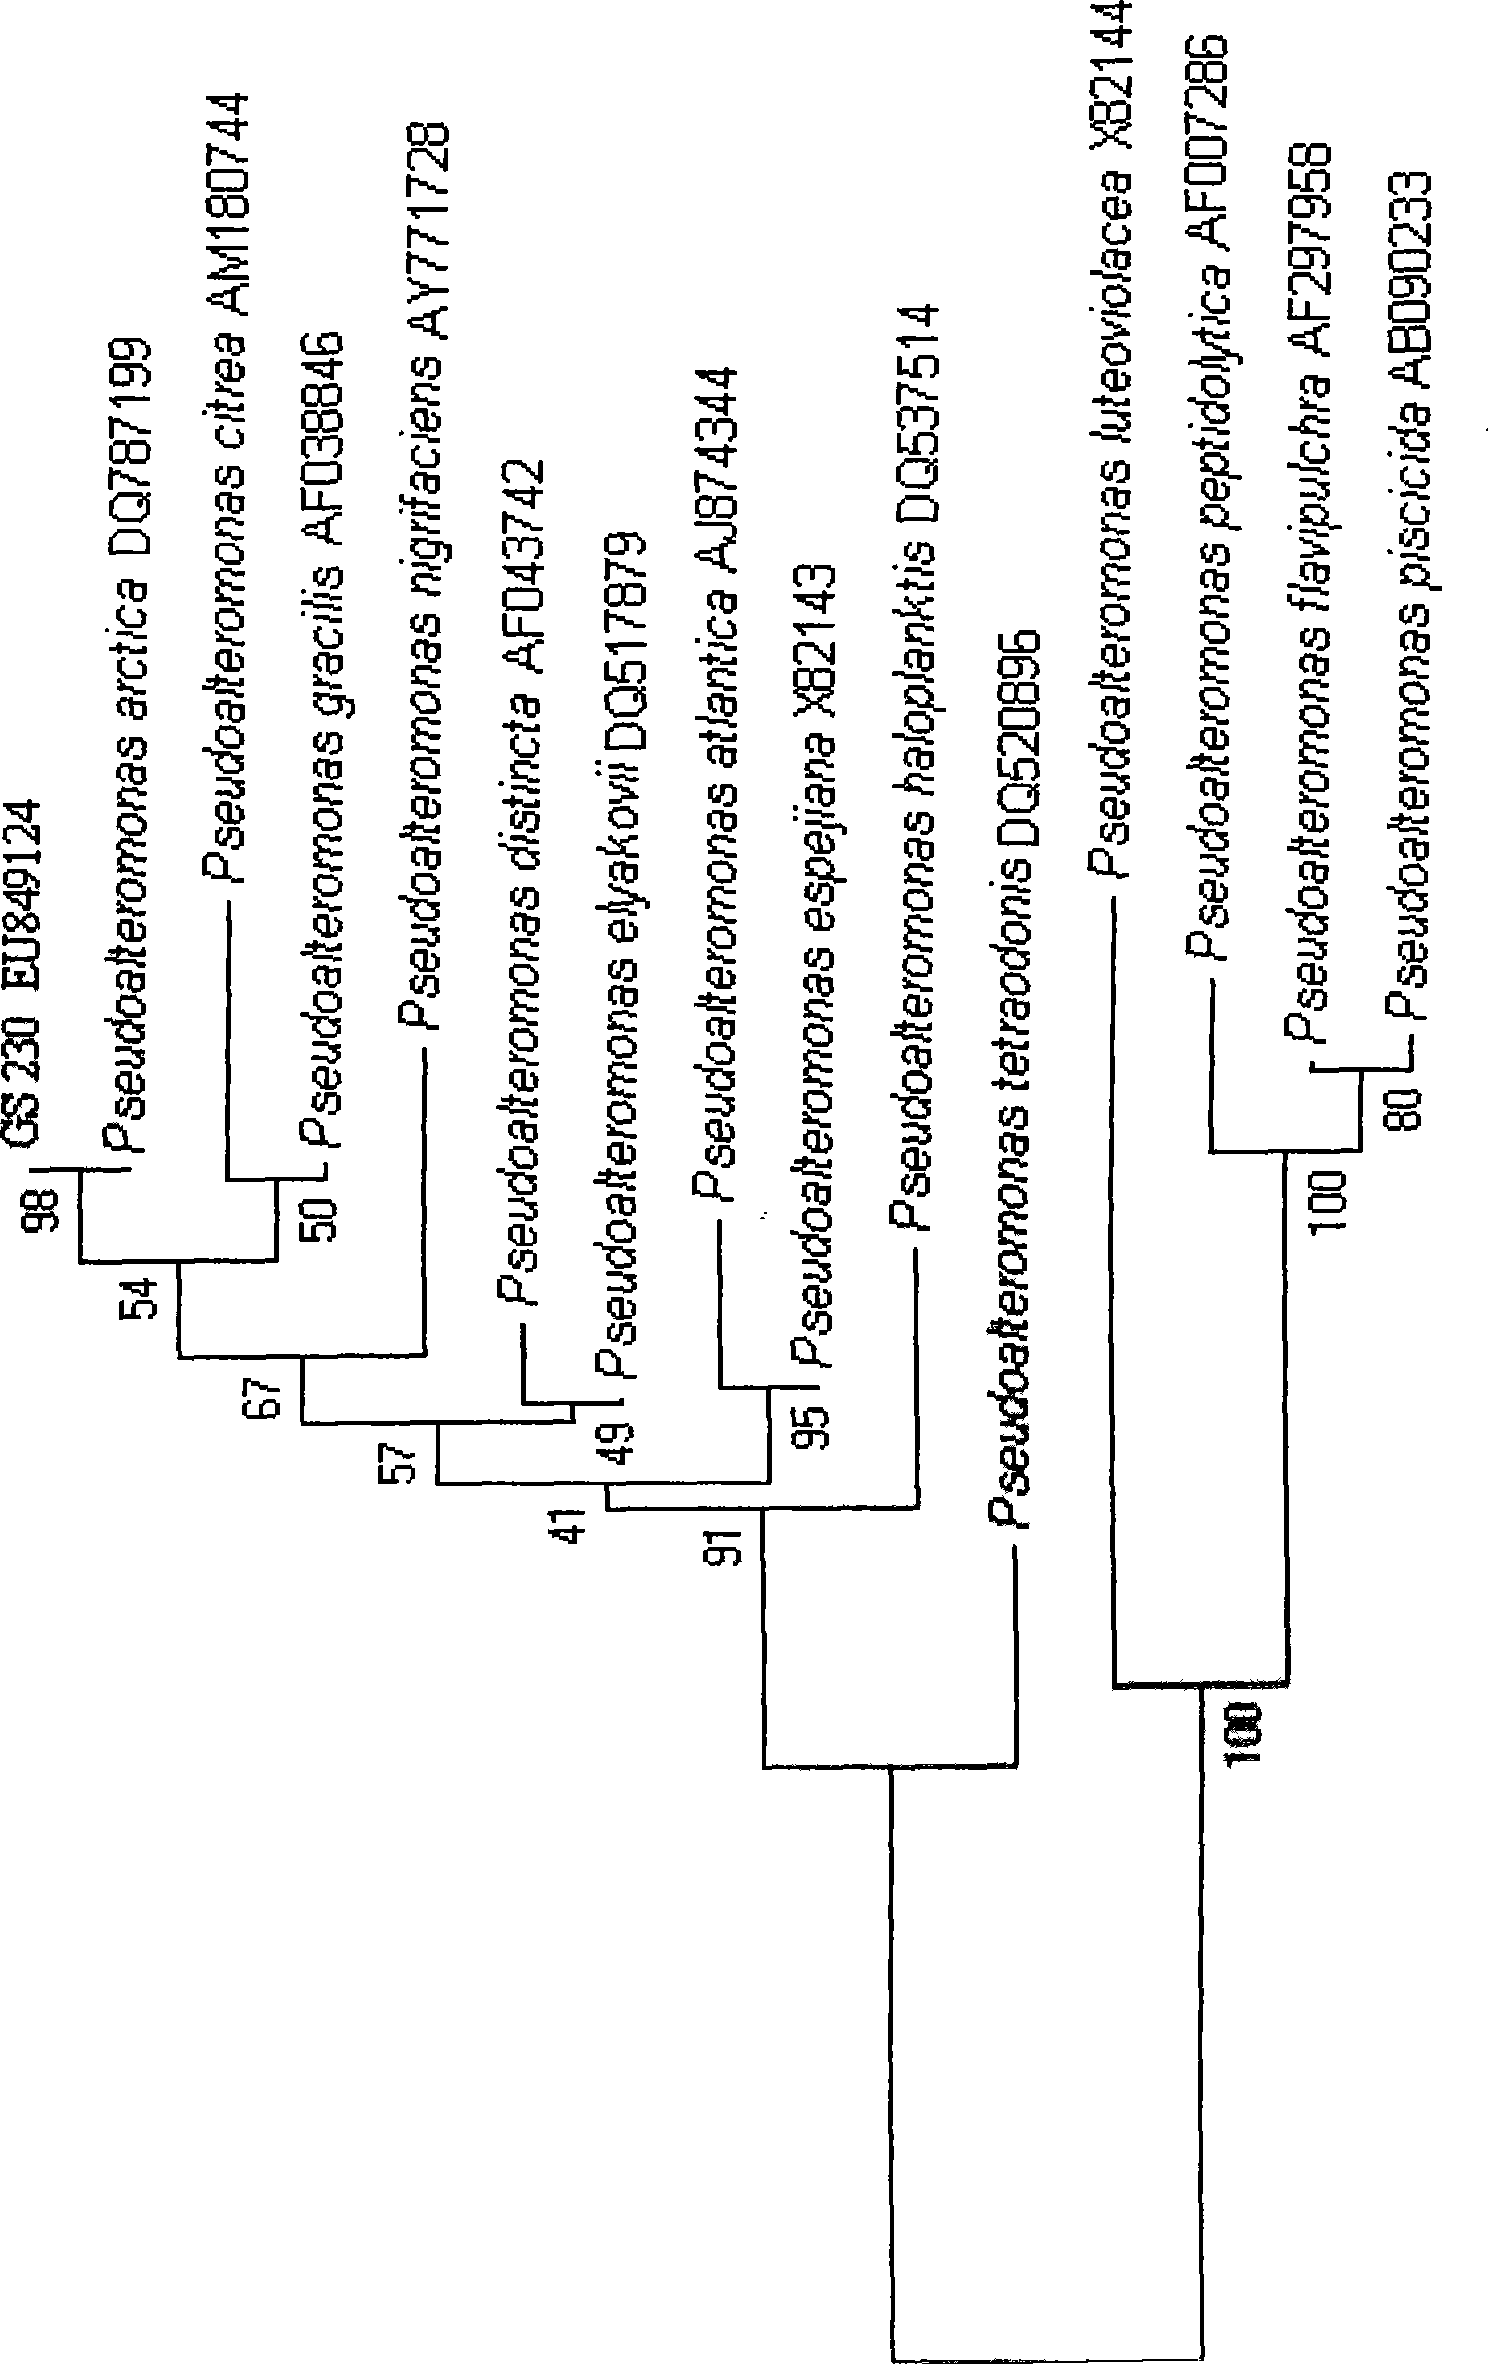 Method for preparing dextran enzyme by marine bacteria Pseudoalteromonas sp.LP621 and product